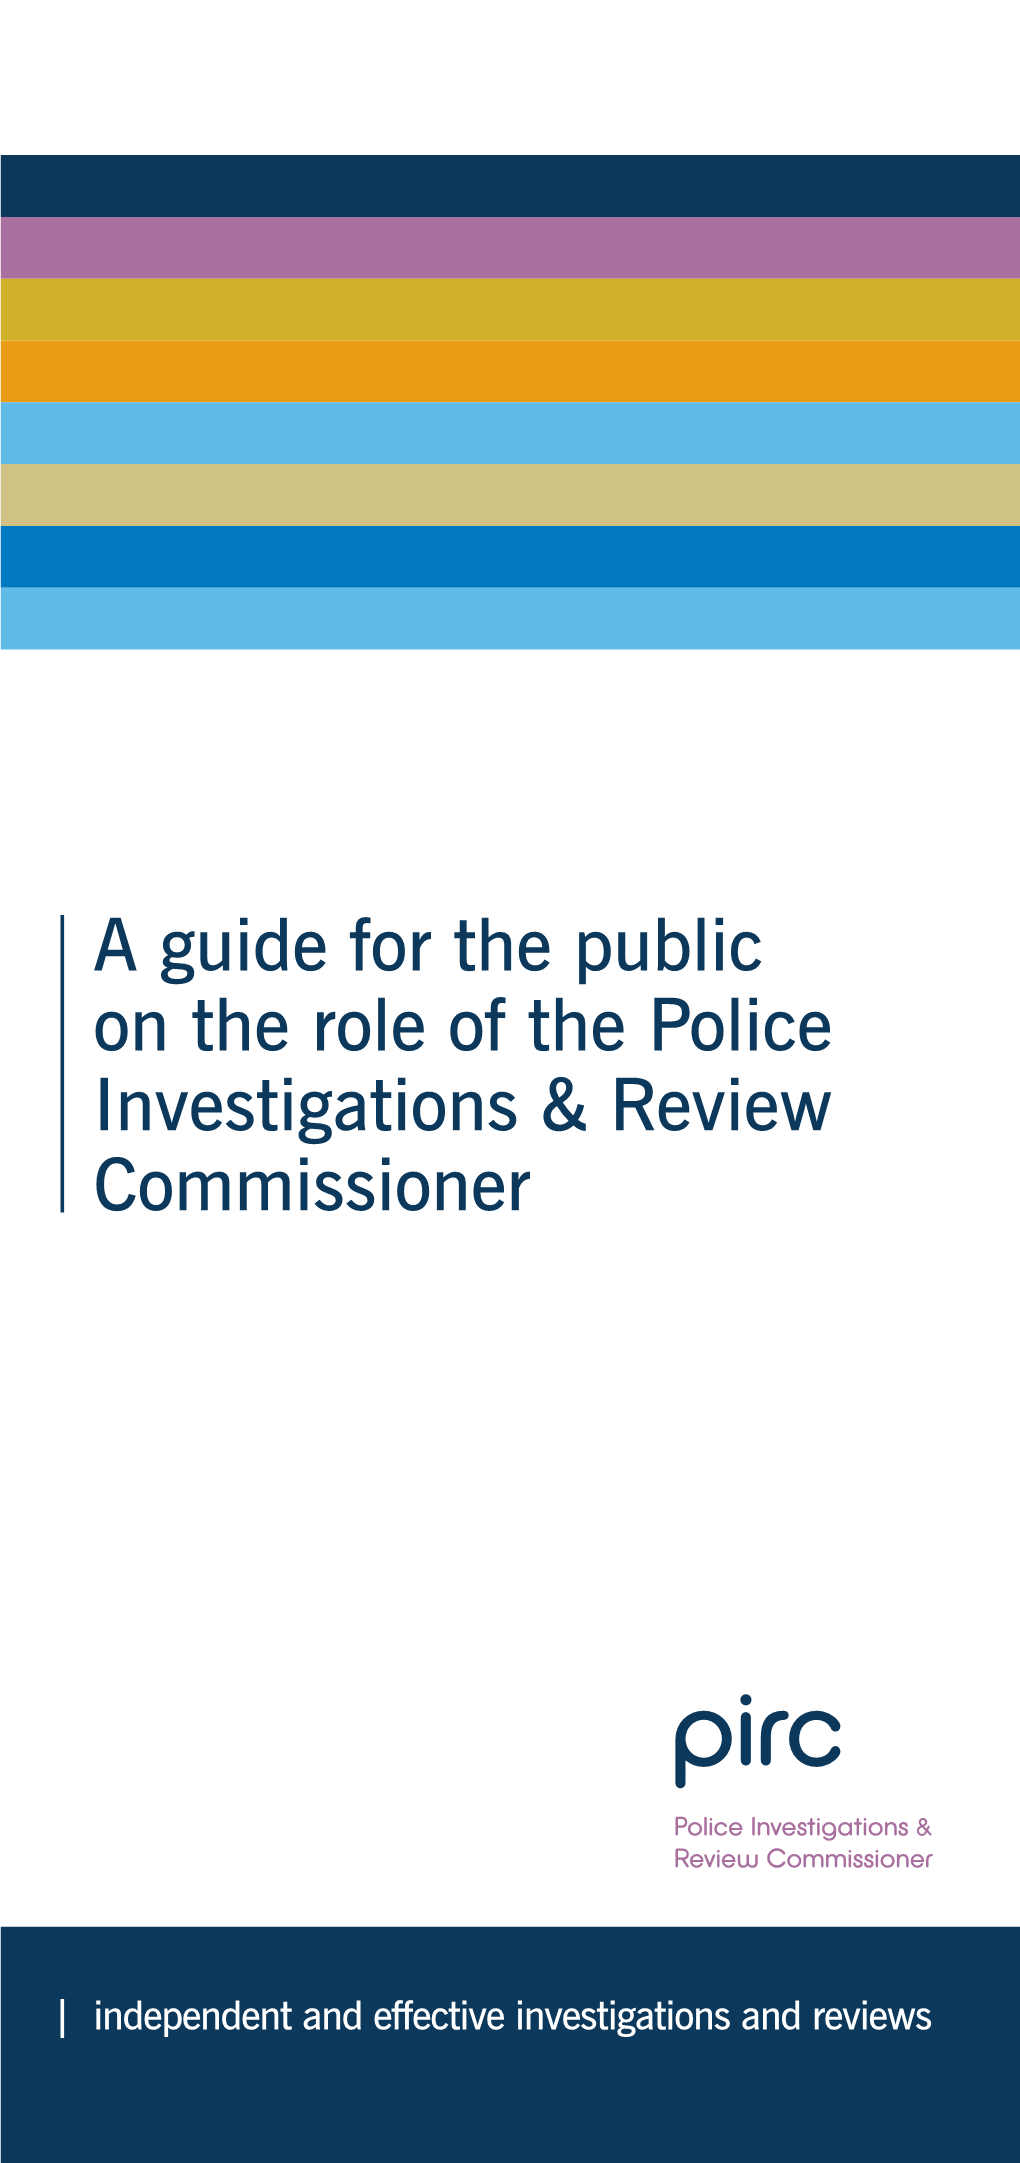 A Guide for the Public on the Role of the Police Investigations & Review